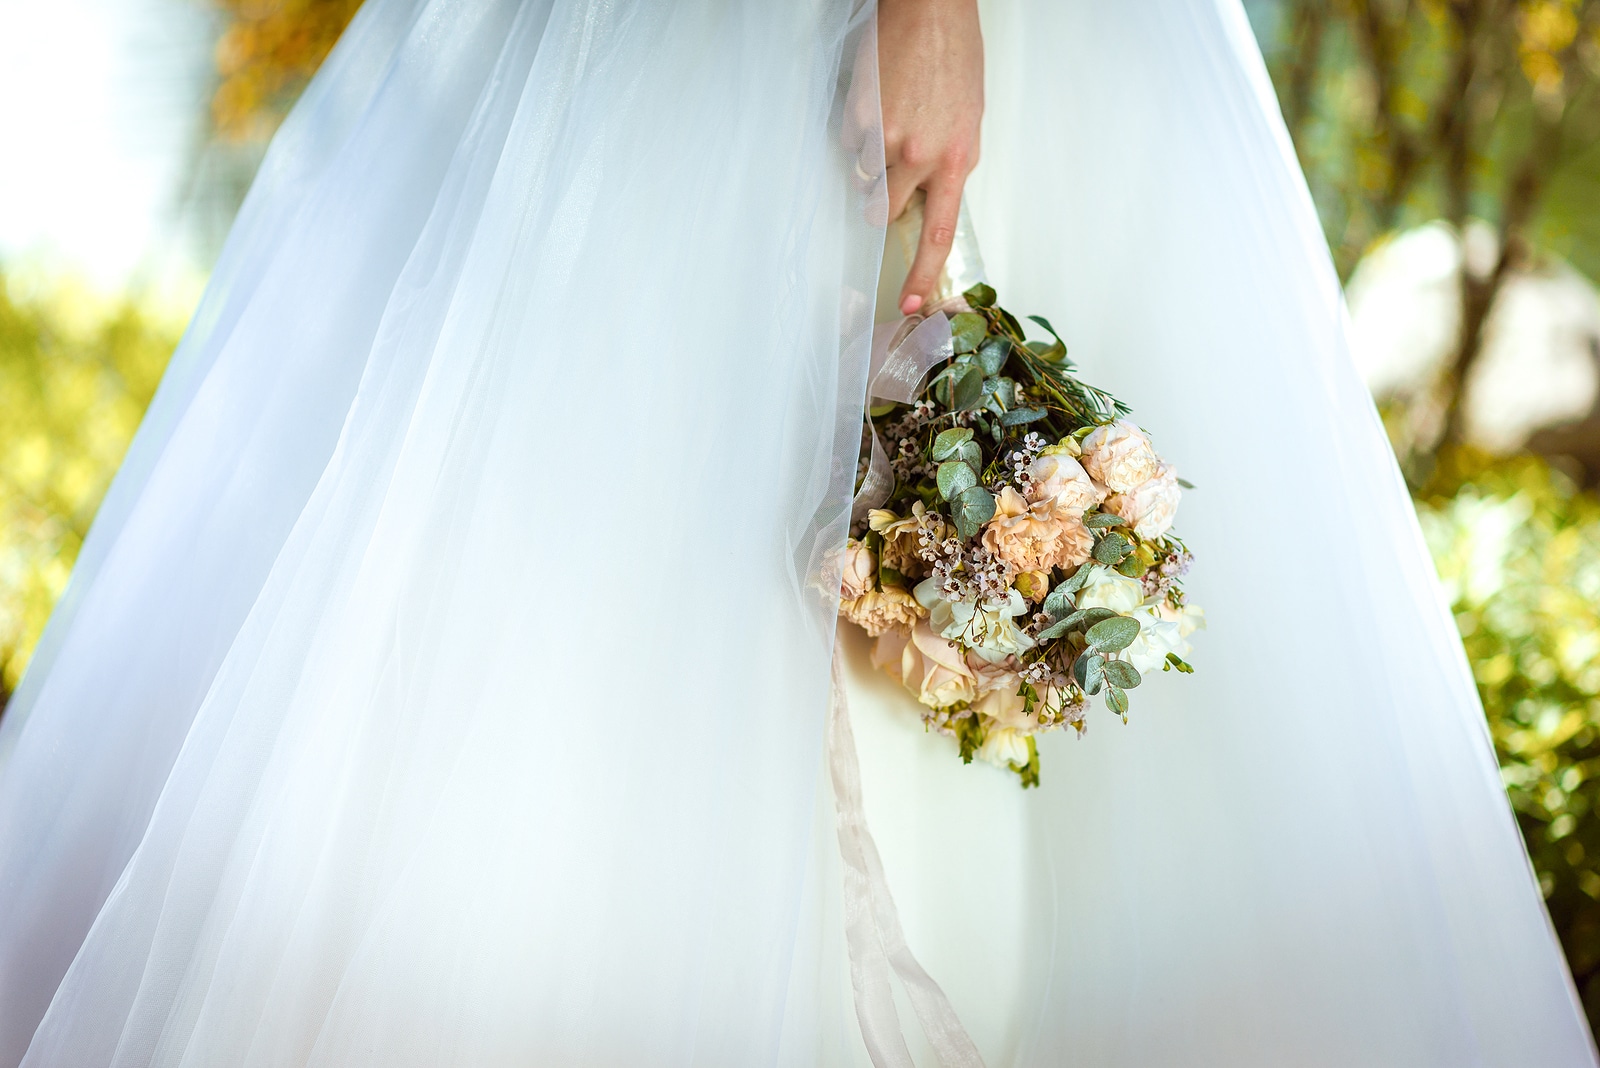 The Bride Holds A Wedding Bouquet From Roses In Her Hands, Weddi